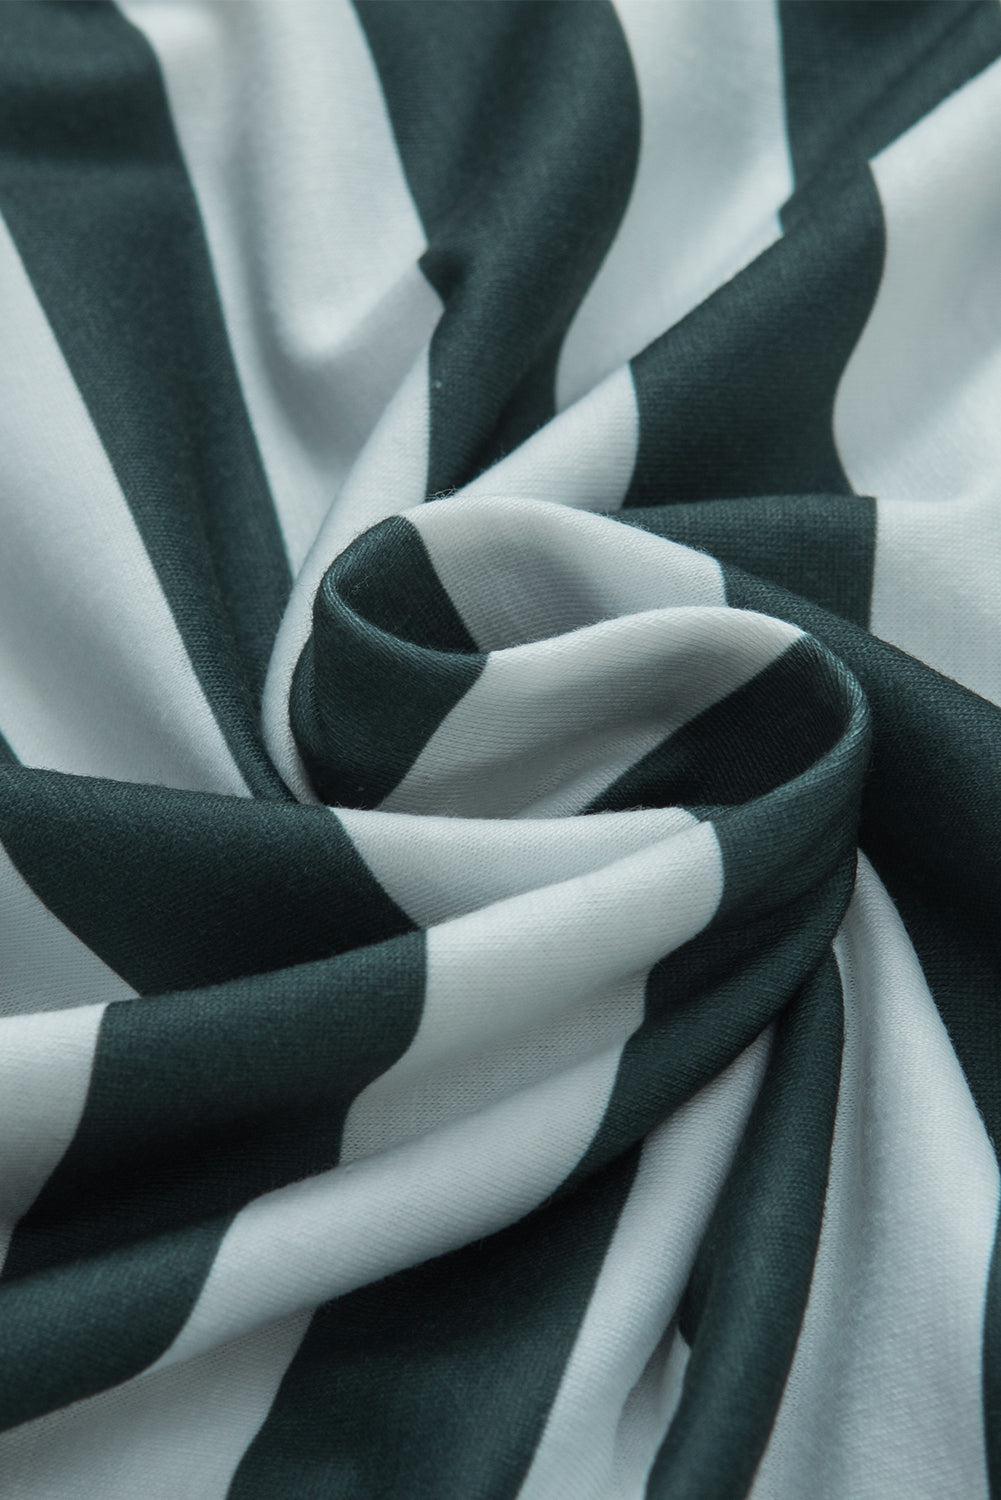 a close up of a black and white striped fabric